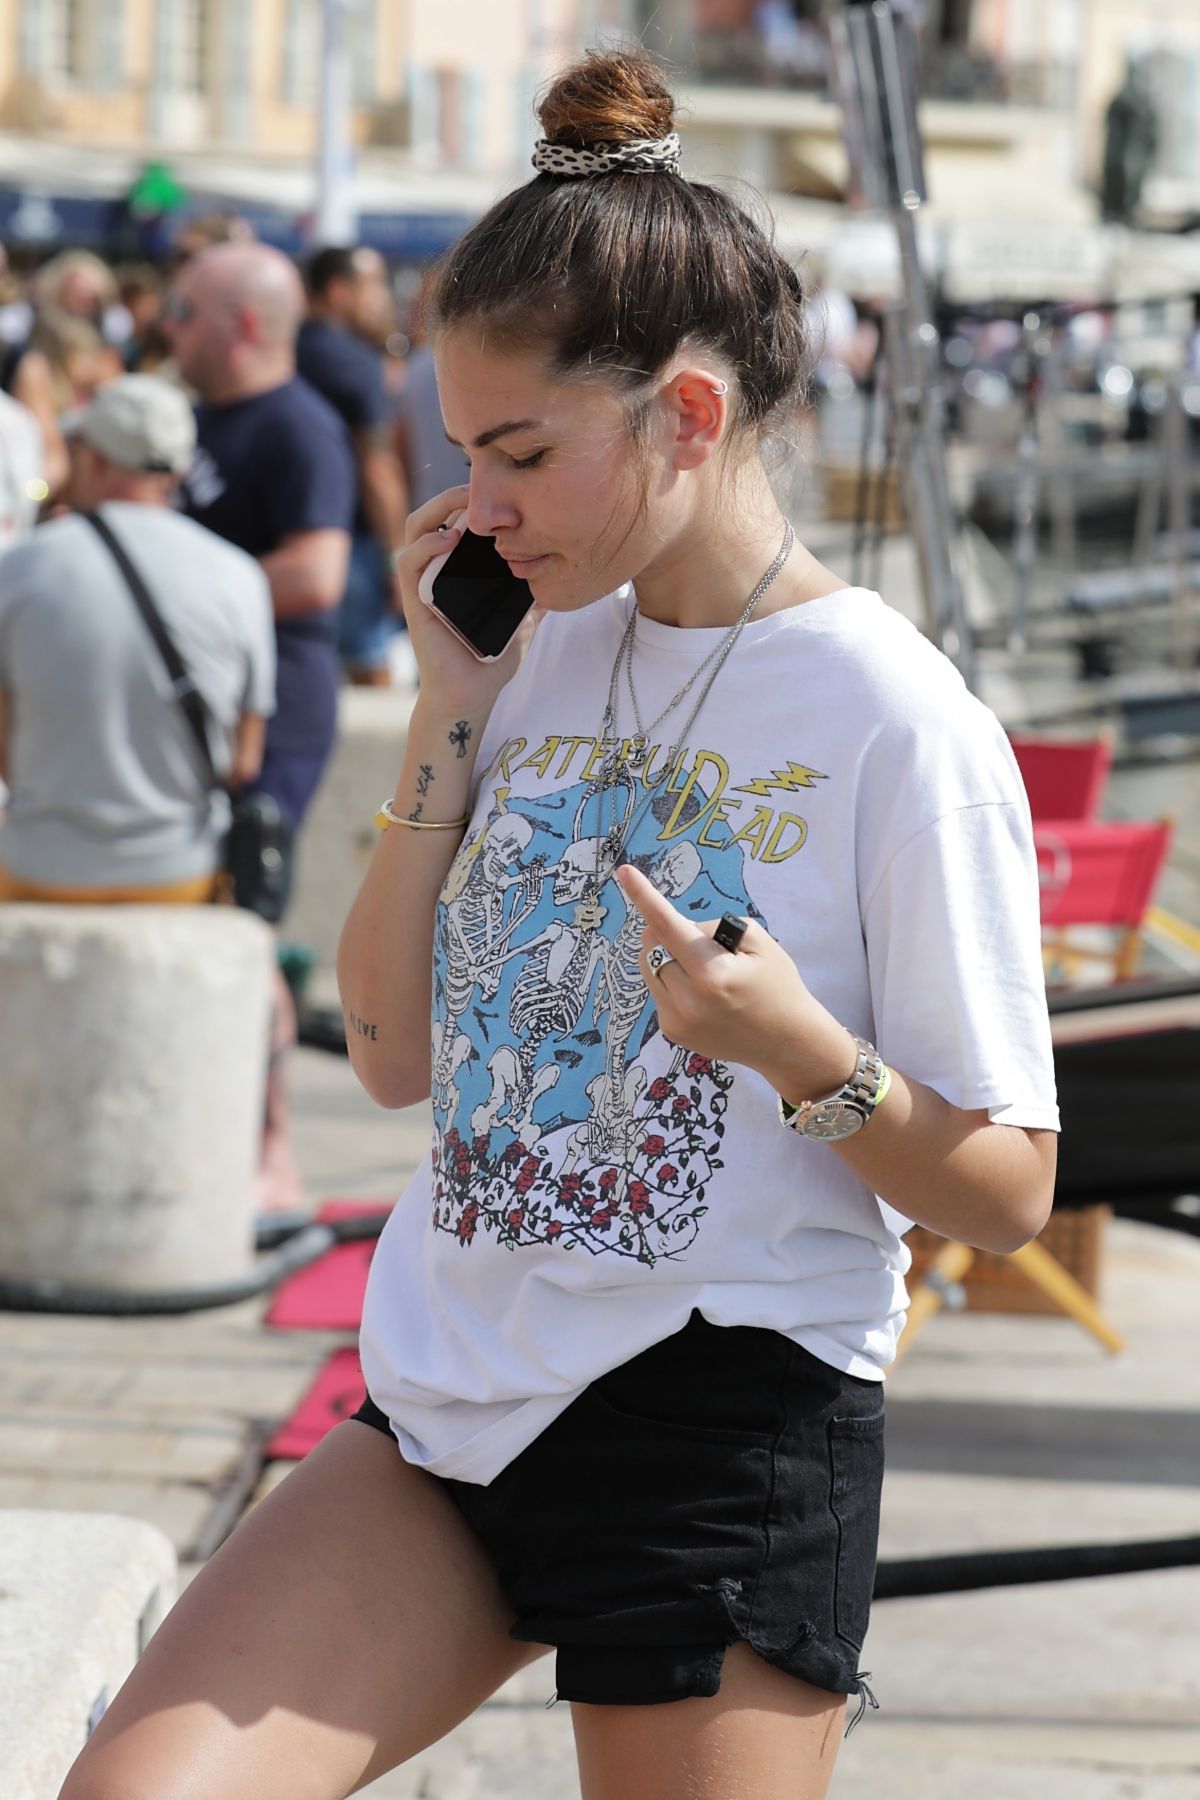 thylane-blondeau-out-and-about-in-st-tropez-07-15-2019-1.jpg